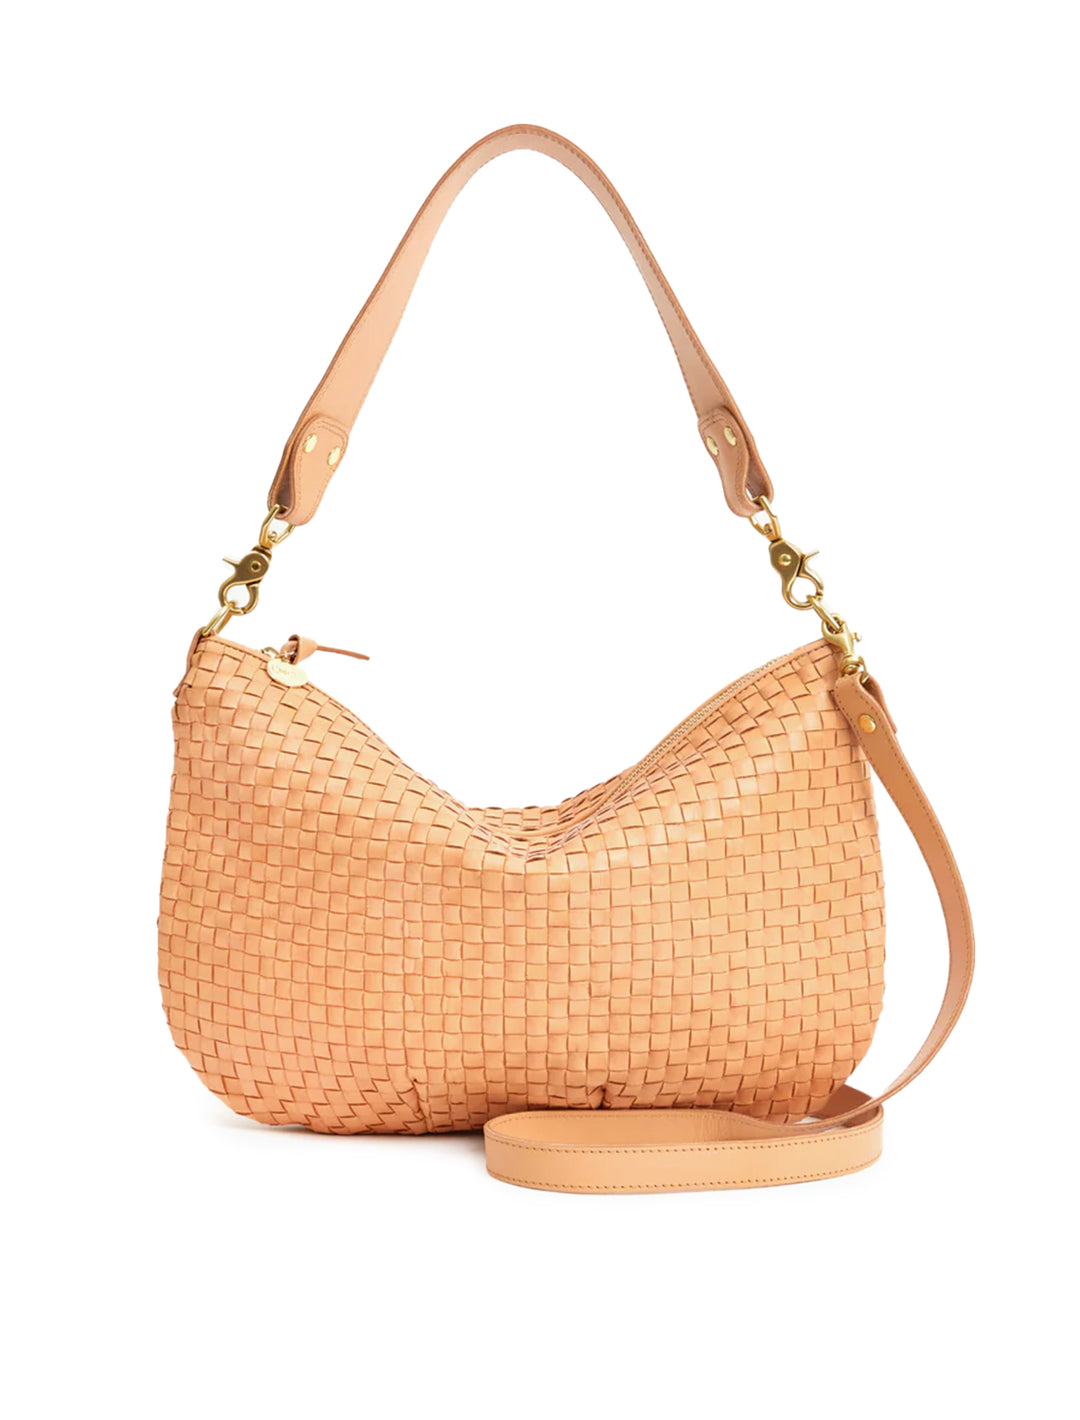 Front view of Clare V.'s moyen messenger in bisque woven.